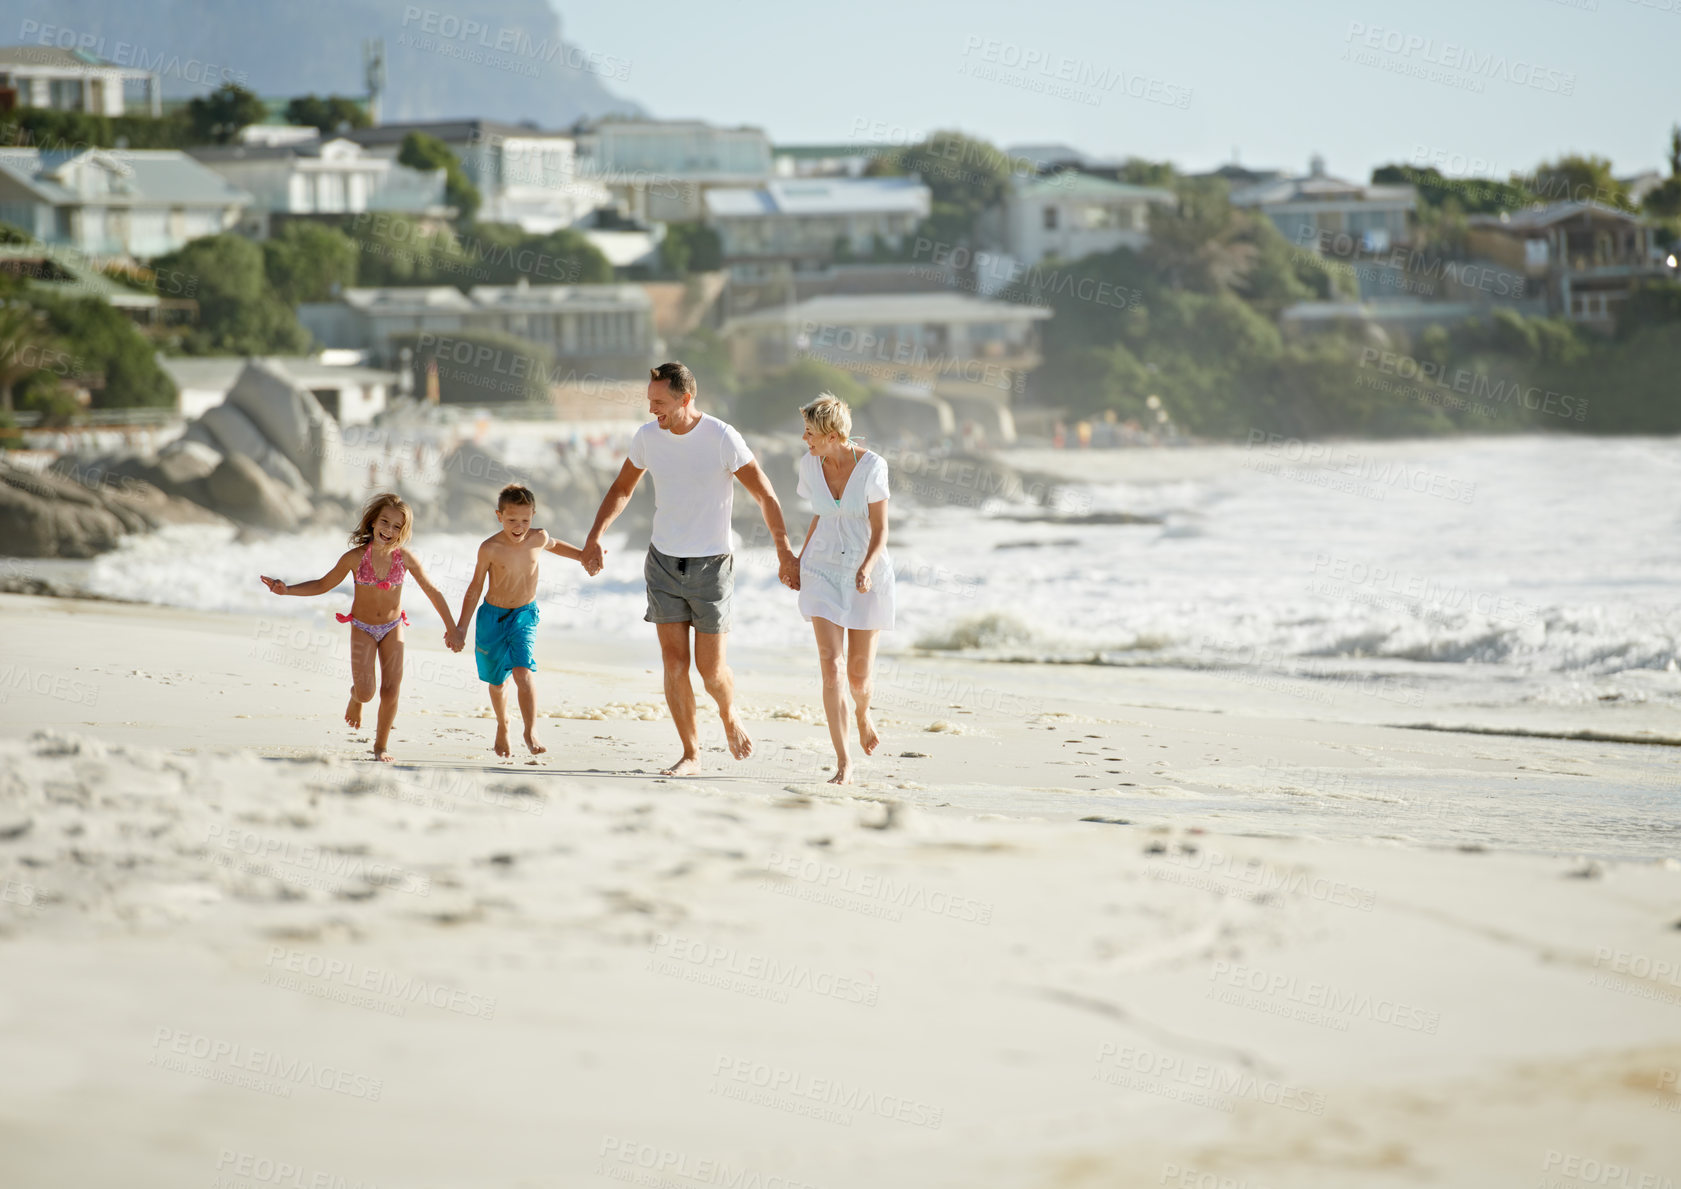 Buy stock photo A happy young family walking down the beach together in the sunshine